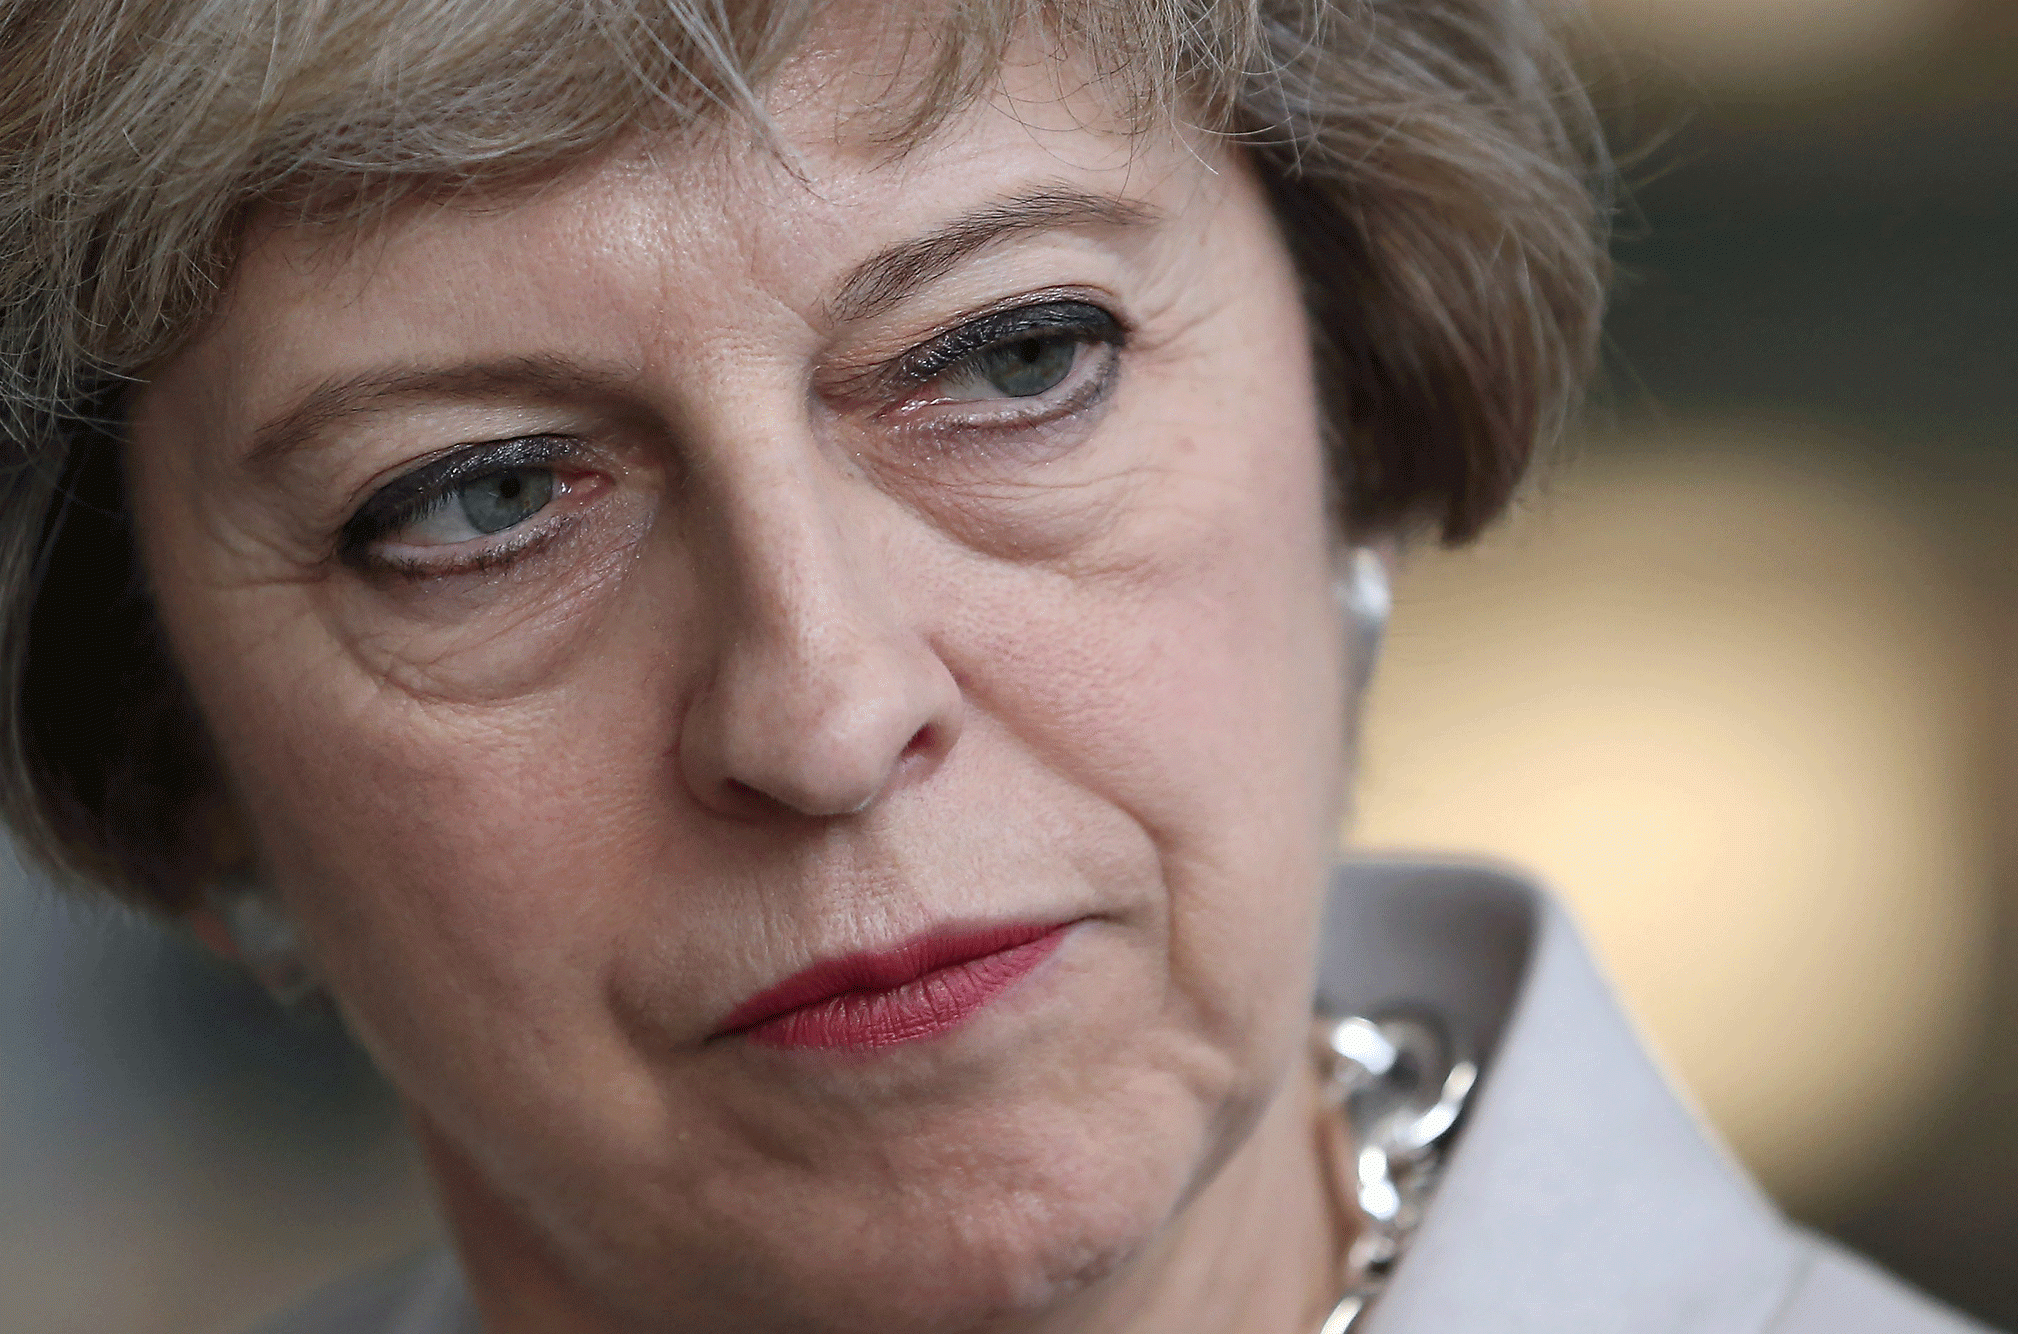 Theresa May launches probe to uncover 'difficult truths' about racial inequality in public services